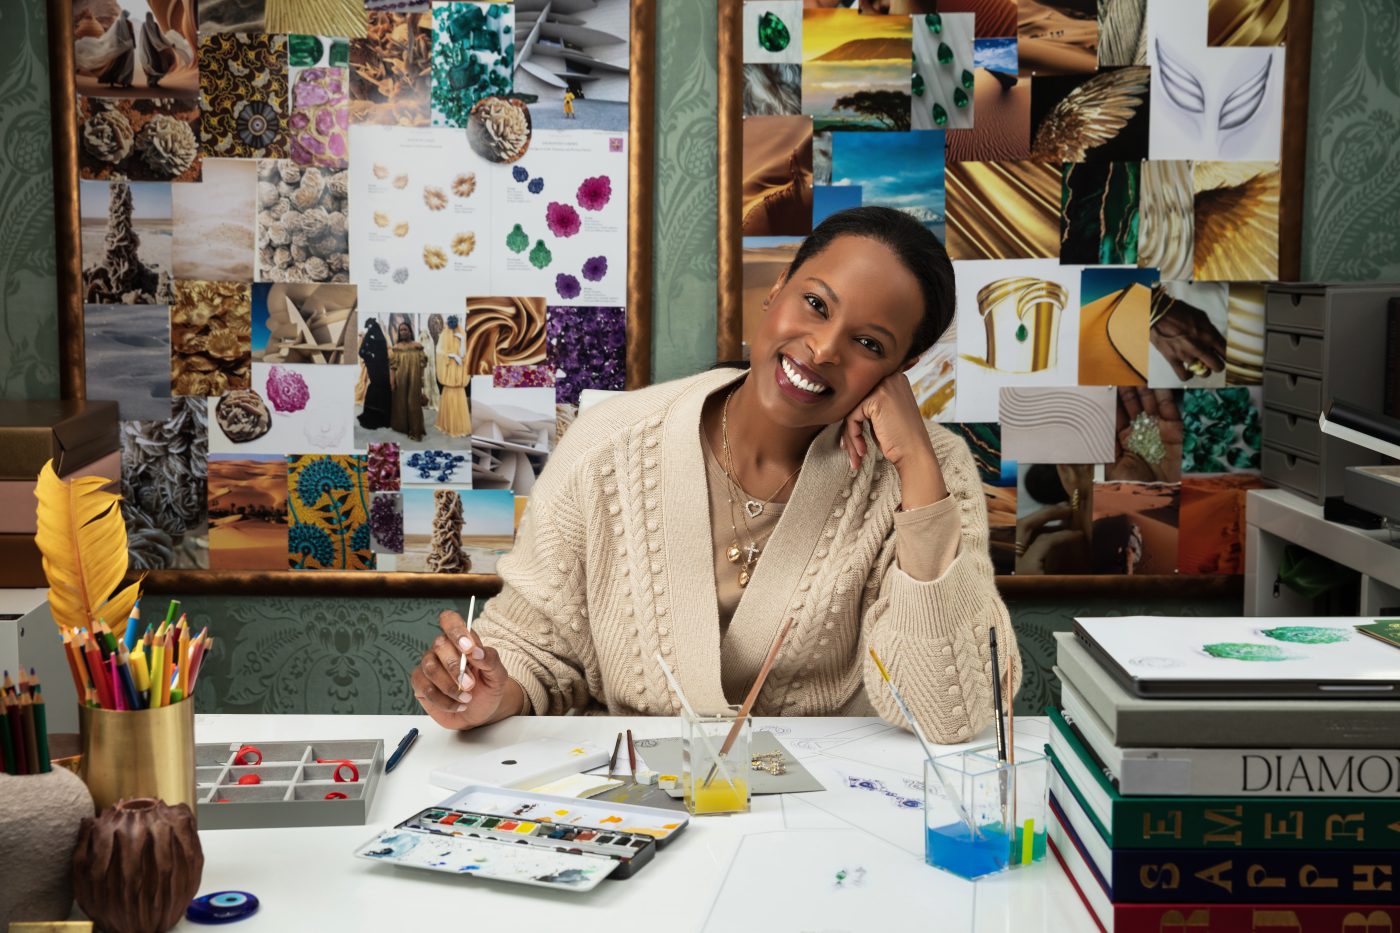 Jewelry designer Vania Leles working on gouache sketches at her desk